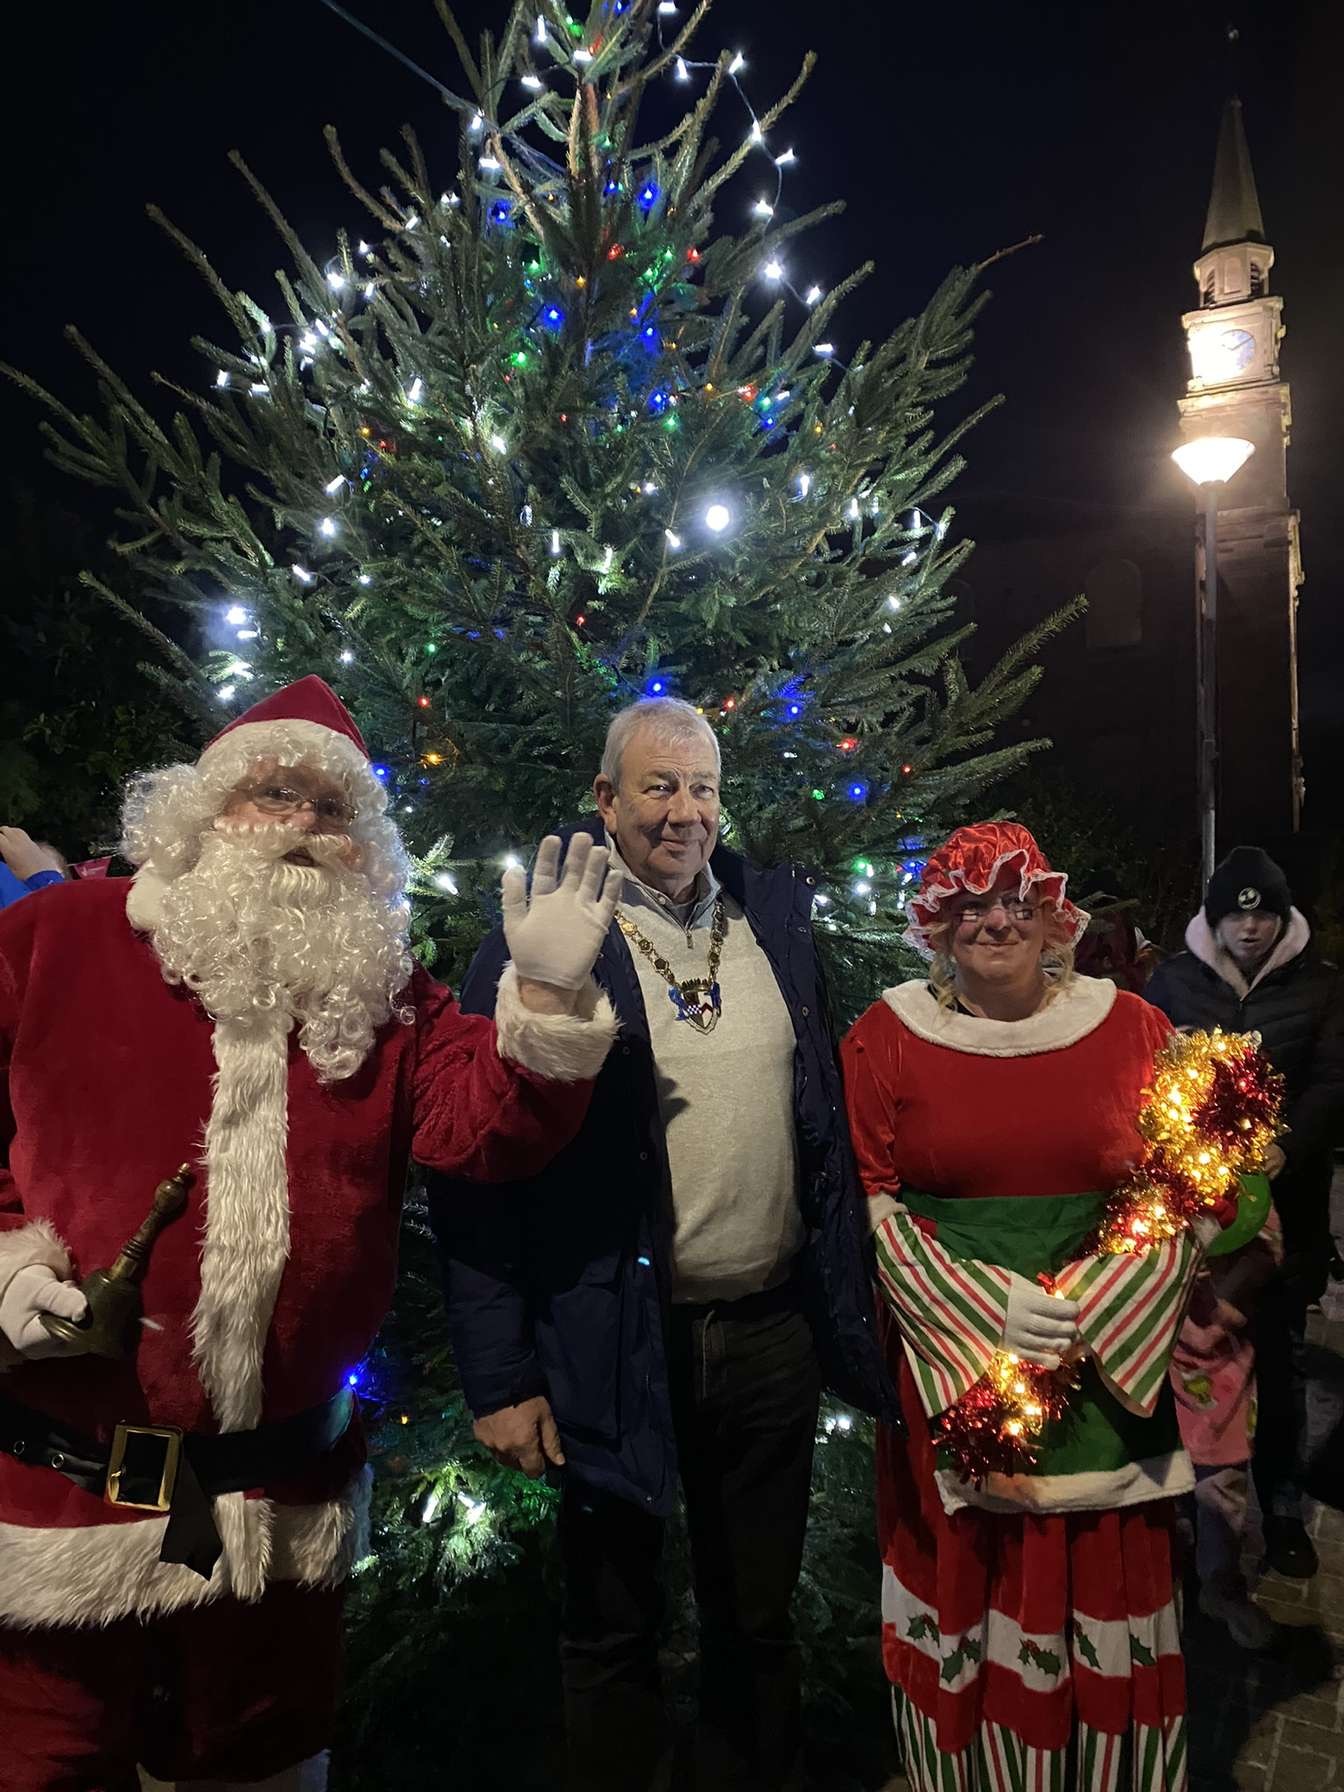 South Ayrshire Provost Iain Campbell joined Santa and Mrs Claus at Tarboltons Christmas lights switch-on on December 1